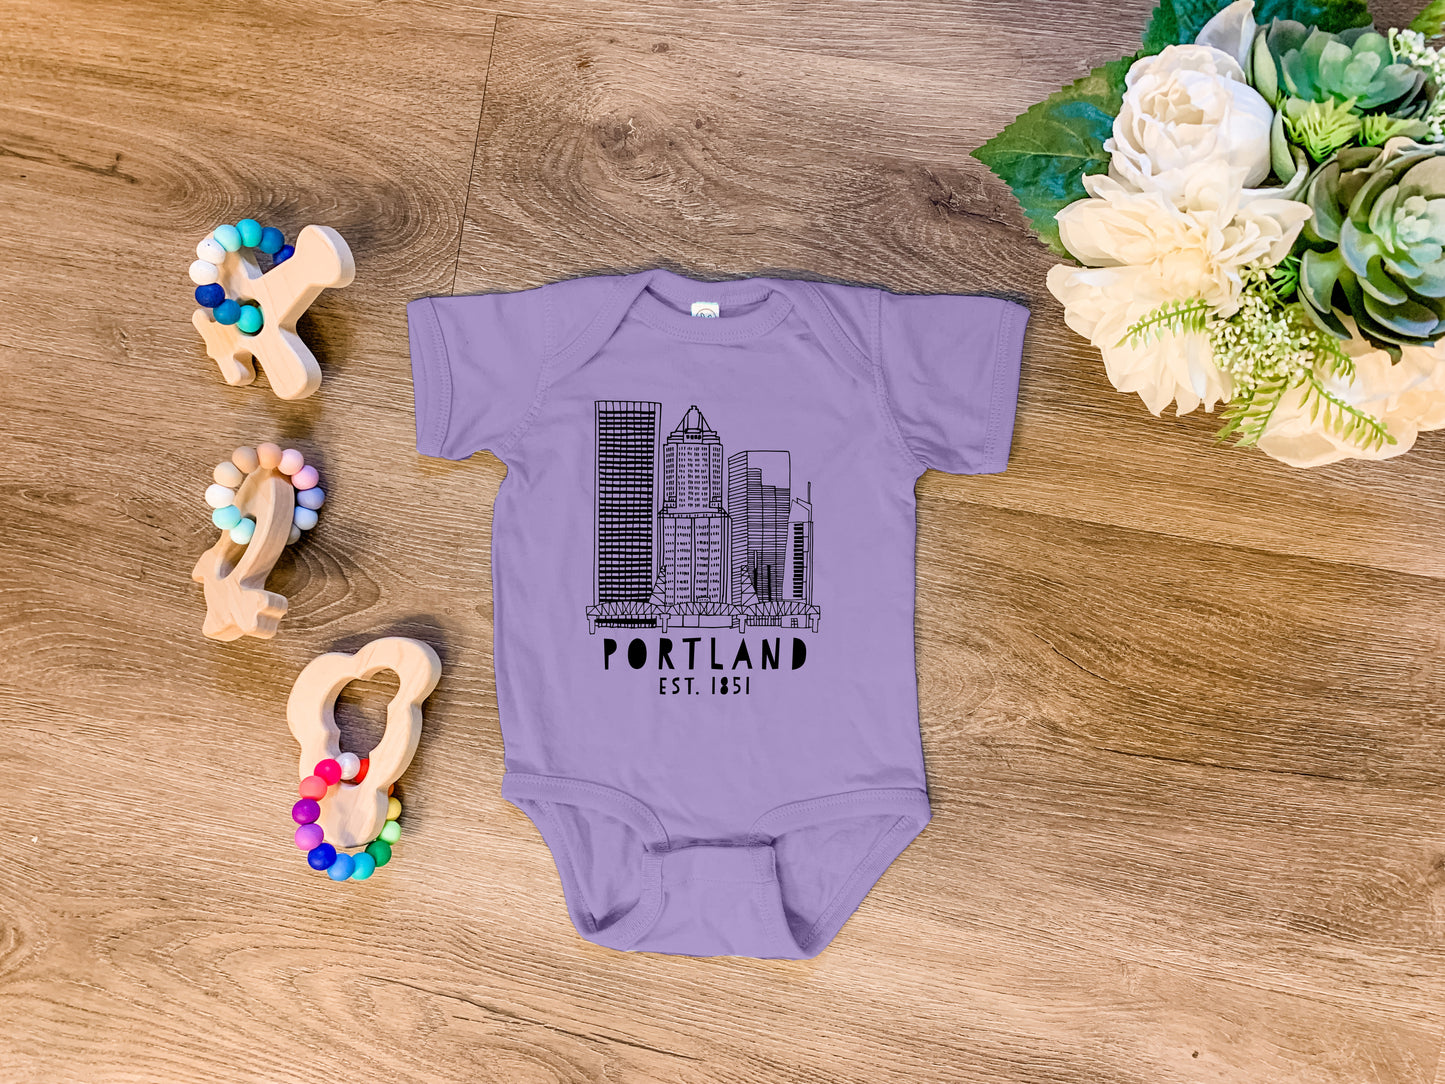 Downtown Portland, Oregon - Onesie - Heather Gray, Chill, or Lavender